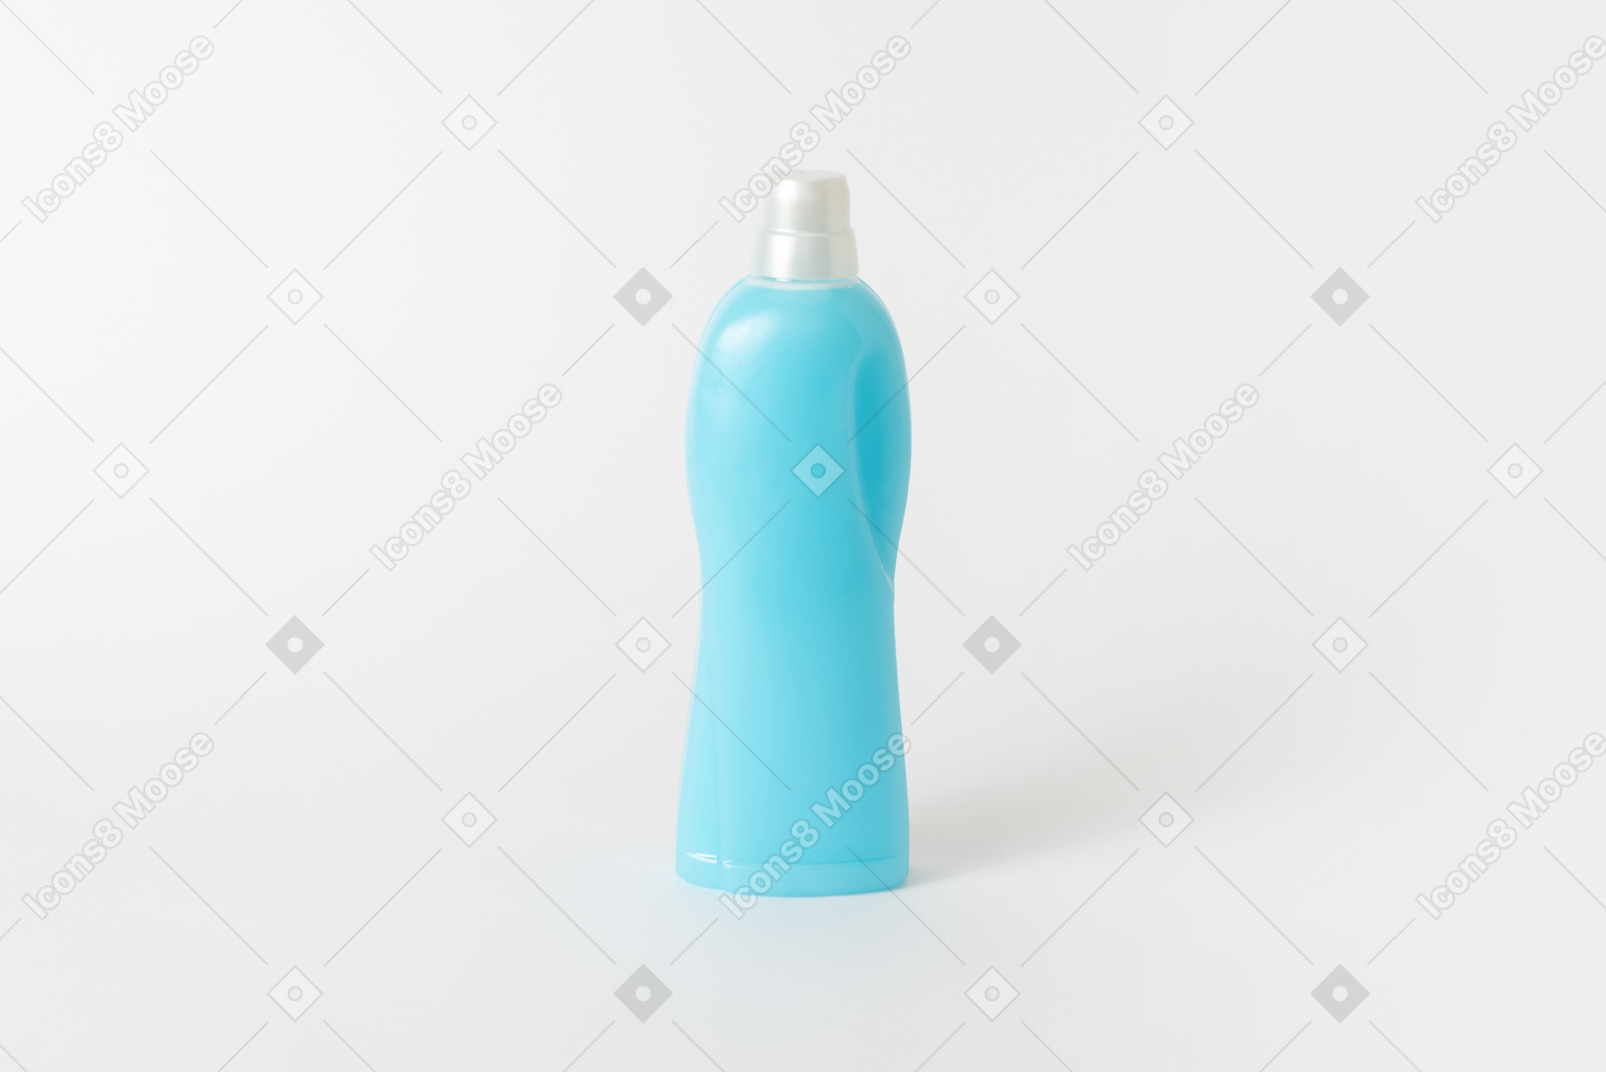 Apply your design ideas on a household bottle